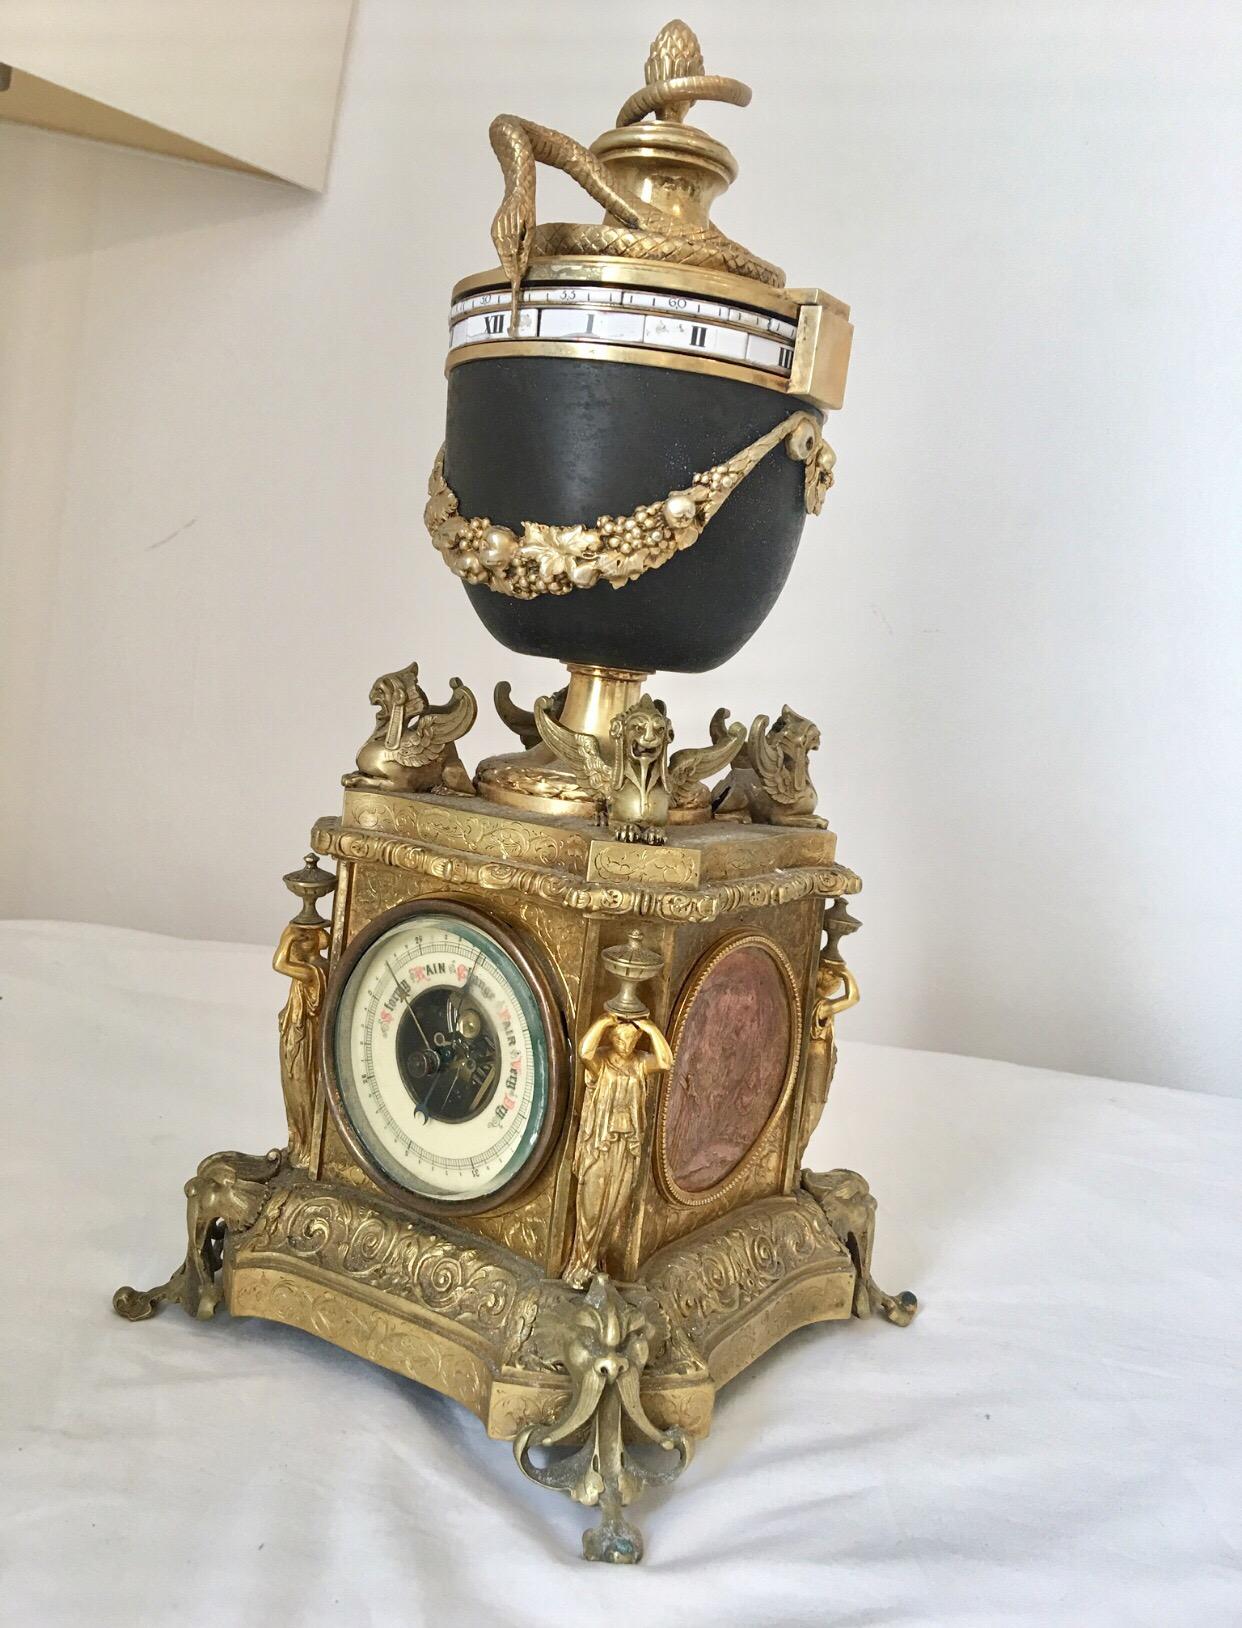 This significant Annular Dial Urn clock is in good working order. it strikes on the hour and hour an half the hour on a bell. Such a beautiful subject in work of art for your mantelpiece. A serpent indicates with his tongue the hours and minutes on